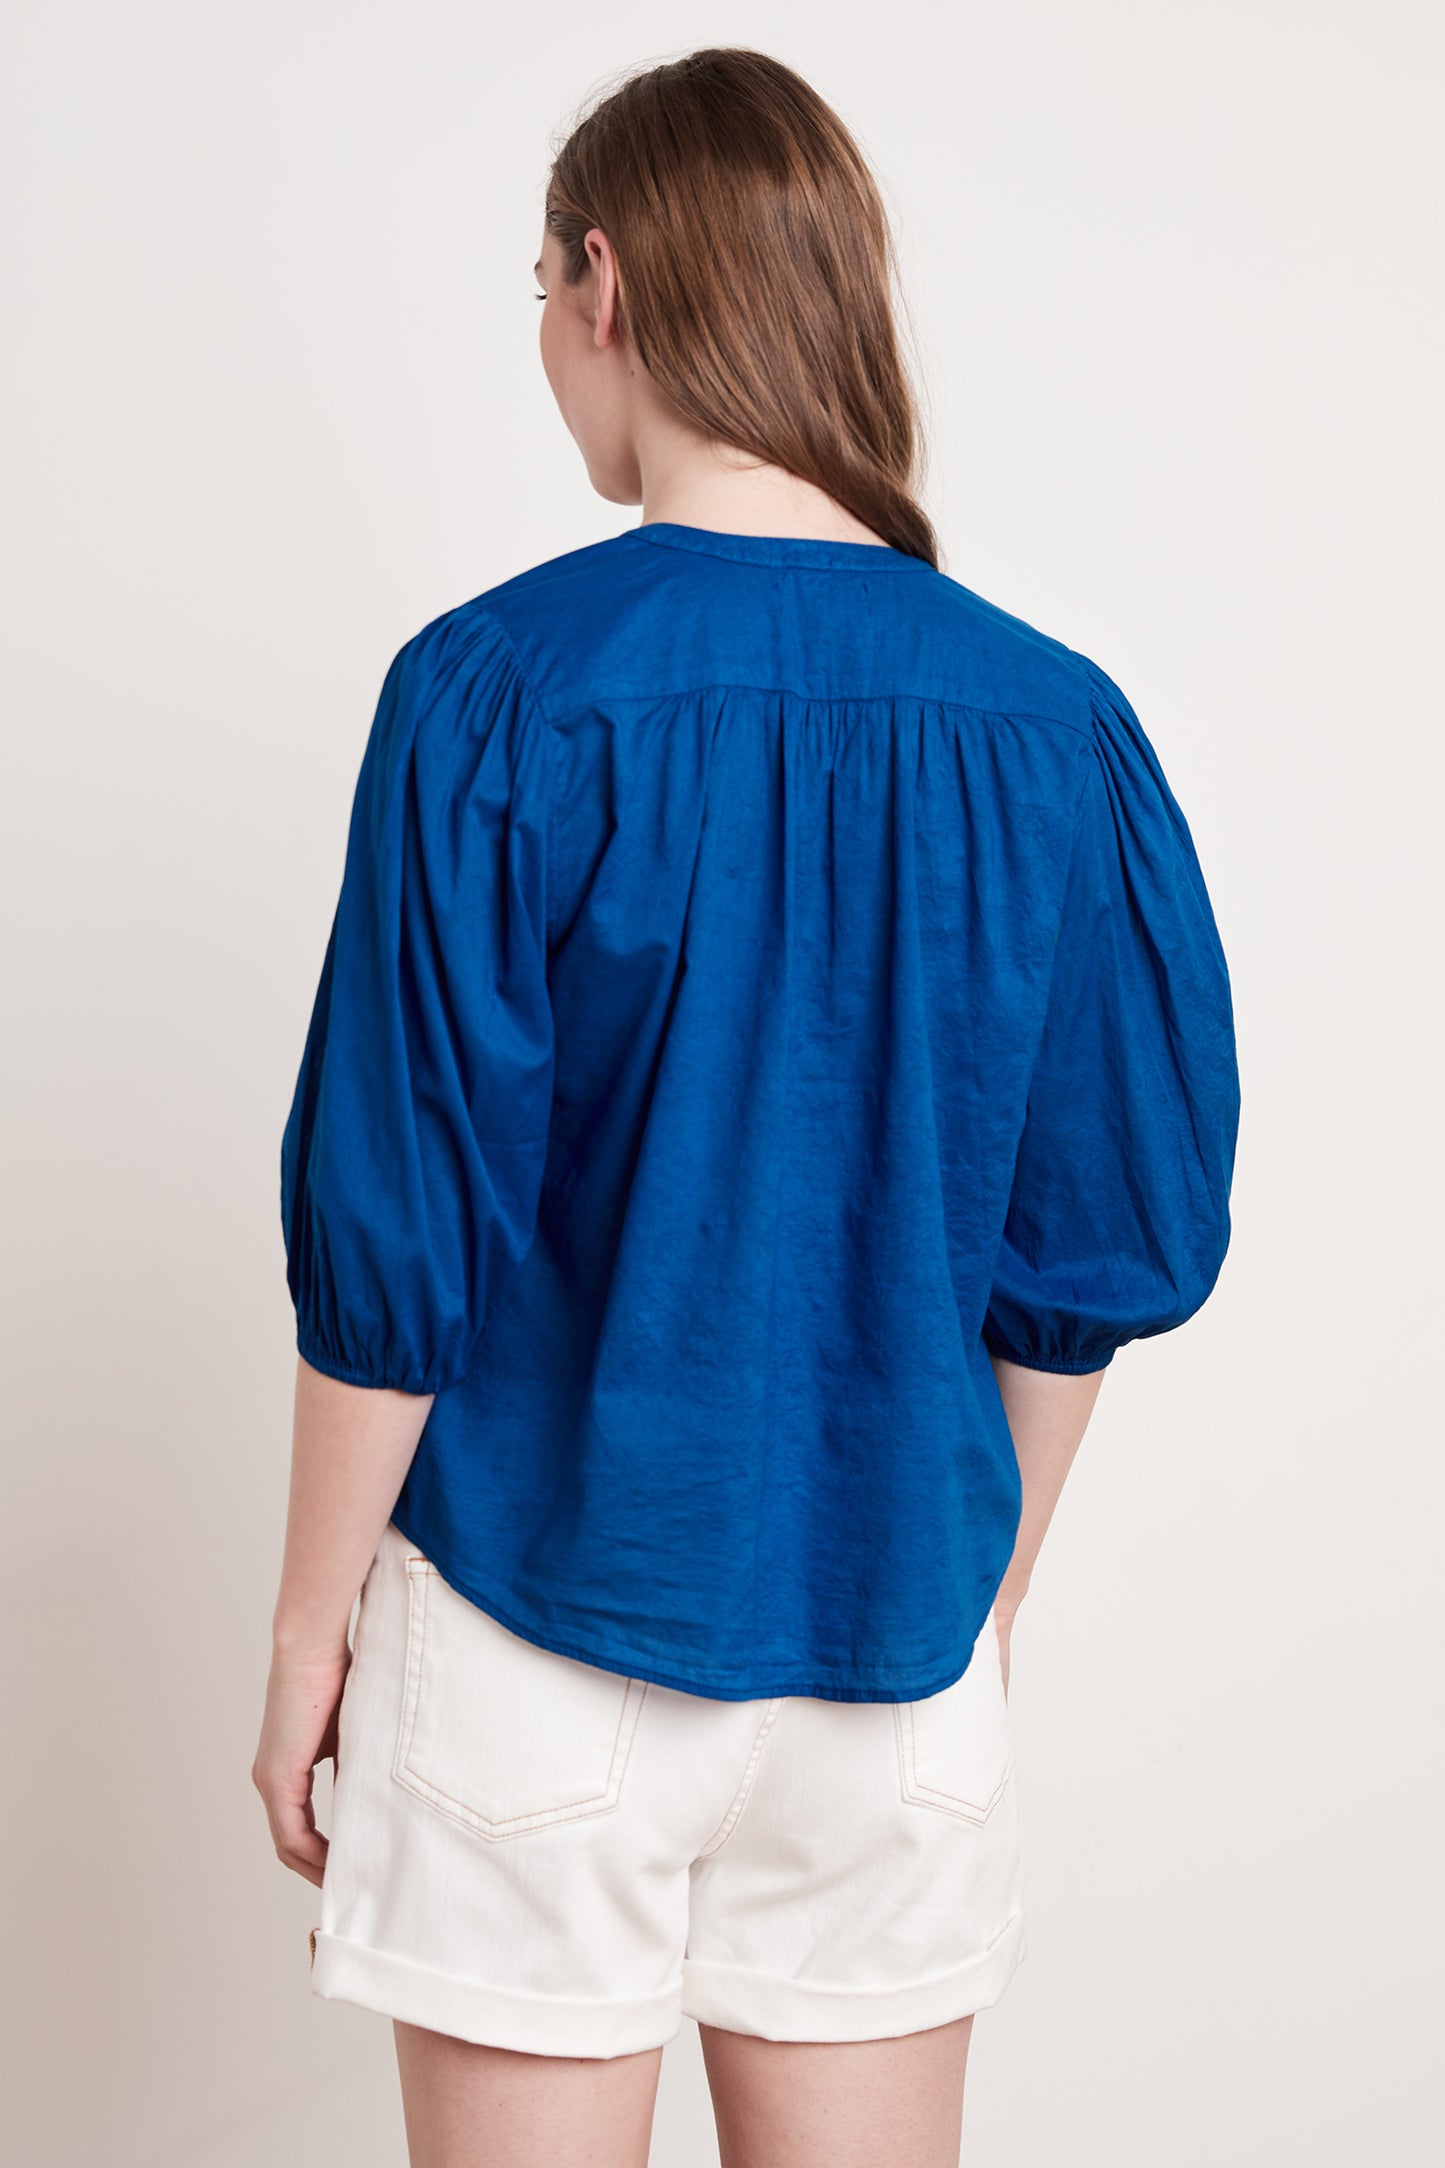 EMBERLY COTTON VOILE TOP IN PATRIOT